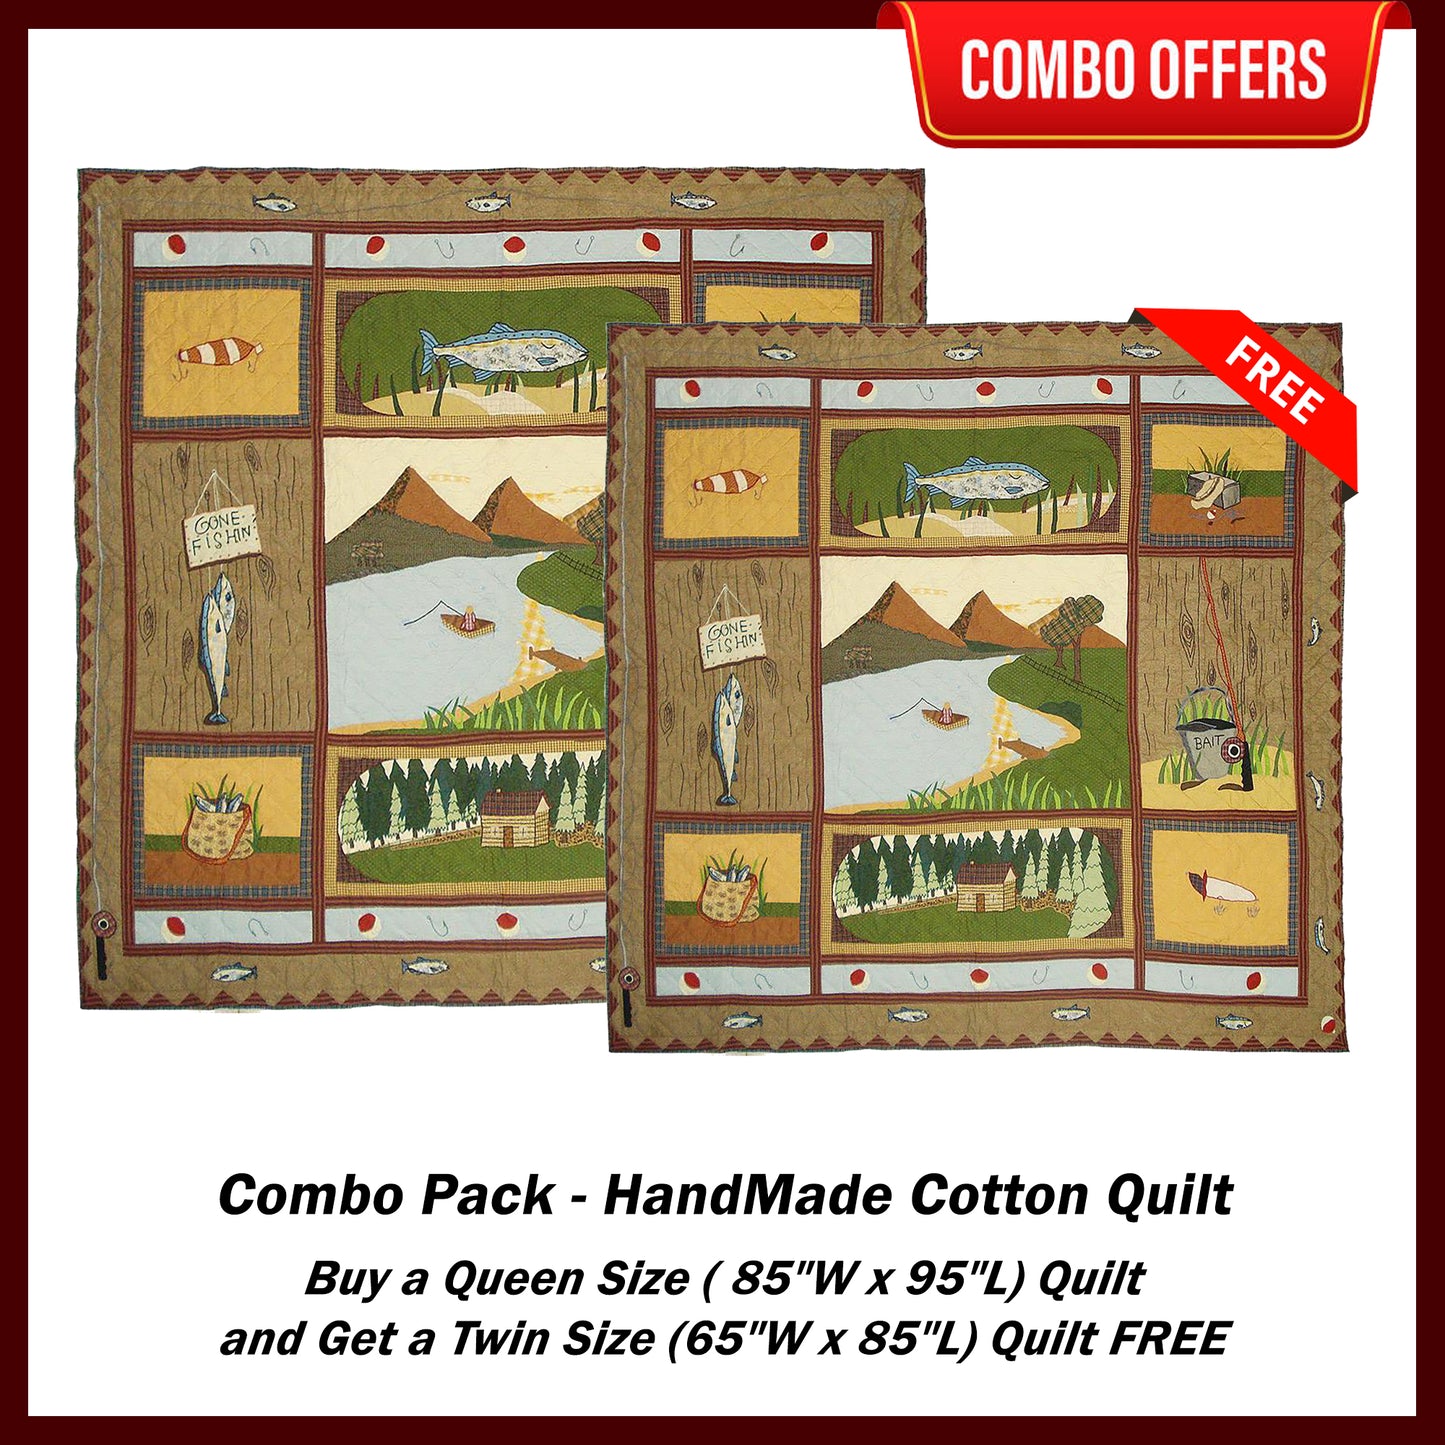 Gone Fishing Handmade Cotton Quilt - Buy a King Size (or) Queen Size Quilt and Get a Twin Size Quilt FREE